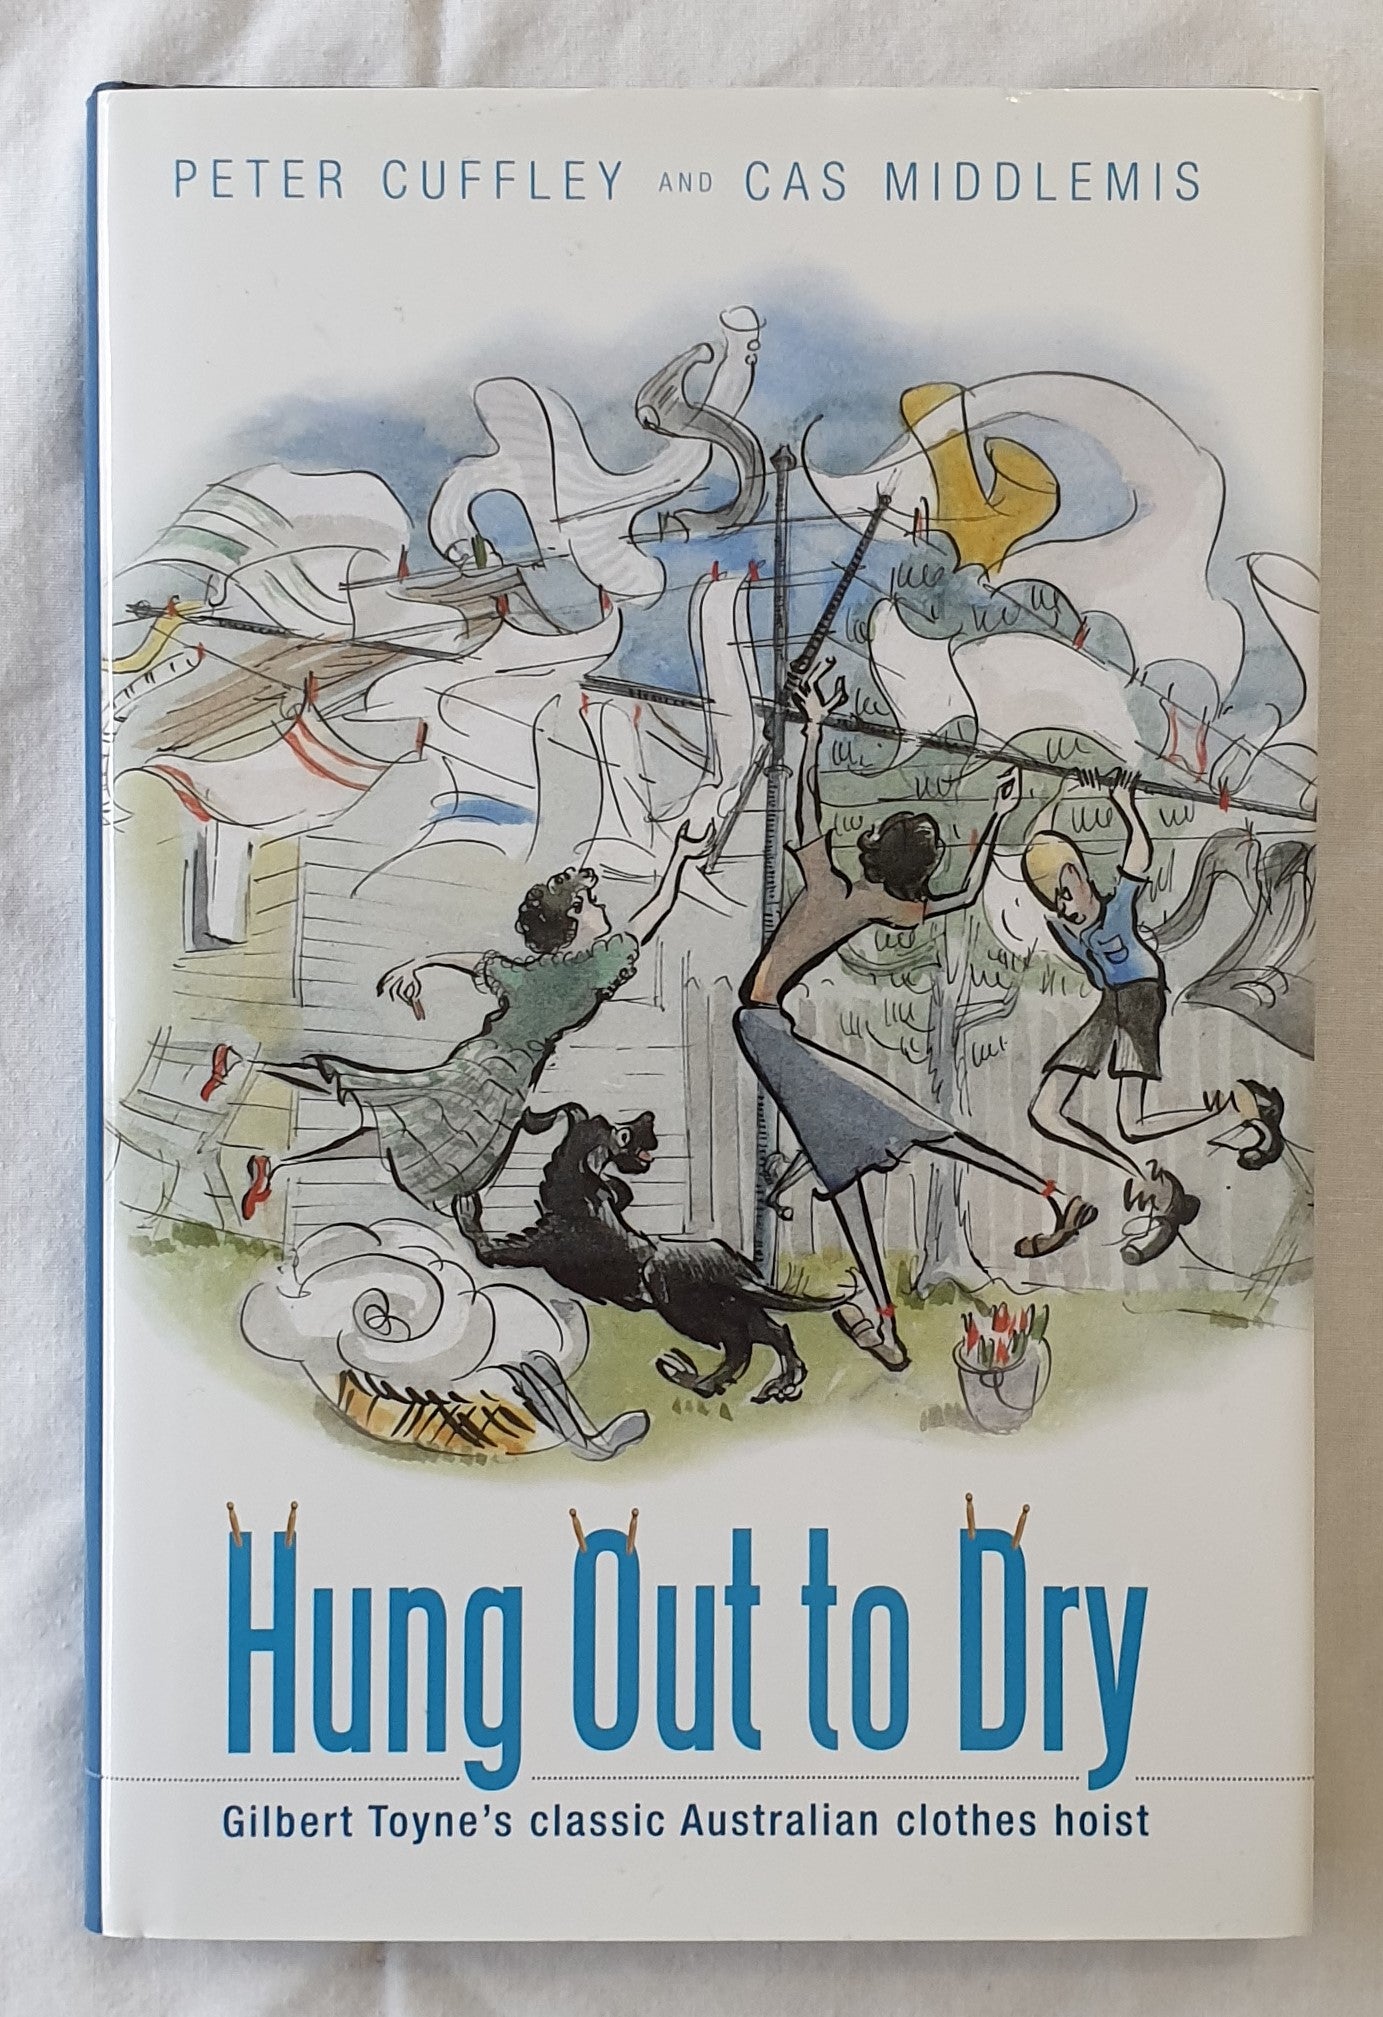 Hung Out To Dry  Gilbert Toyne’s classic Australian clothes hoist  by Peter Cuffley and Cas Middlemis